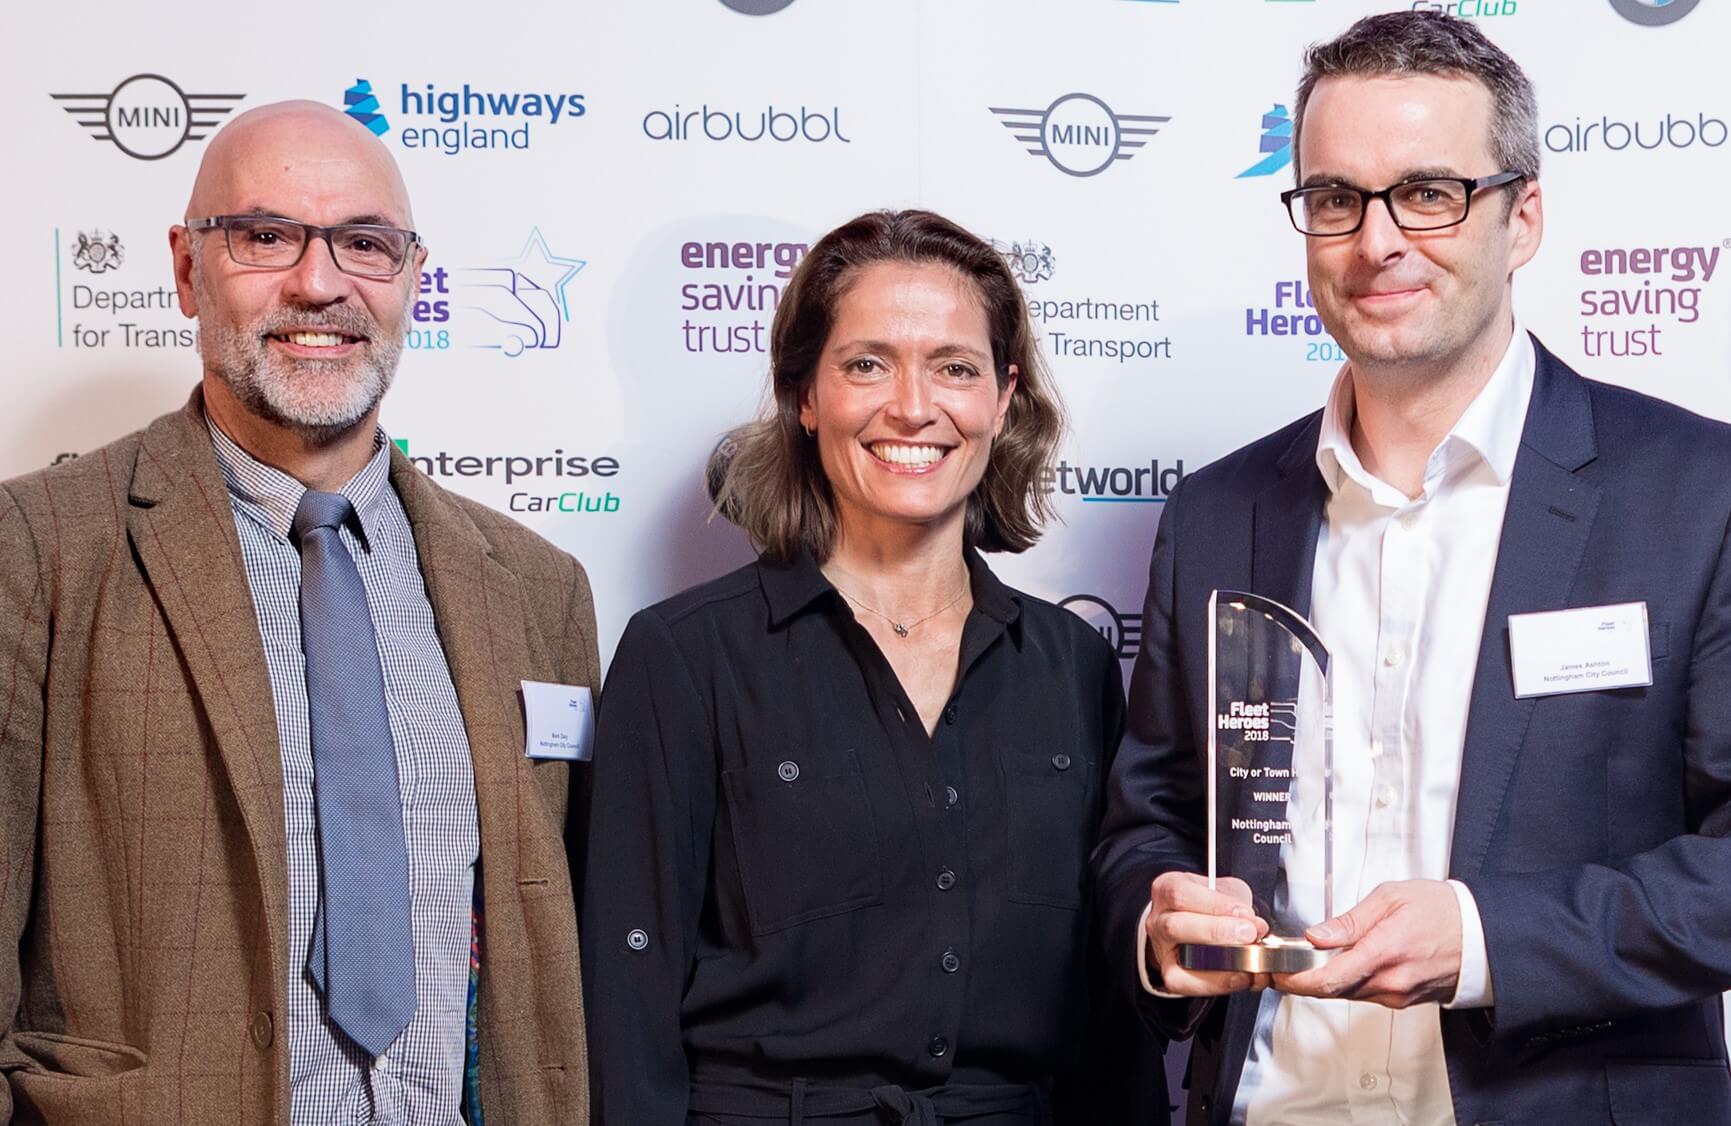 Senior Transport Planner Mark Daly and Transport Strategy Manager James Ashton are presented with the City Hero award by motoring journalist Amanda Stretton.